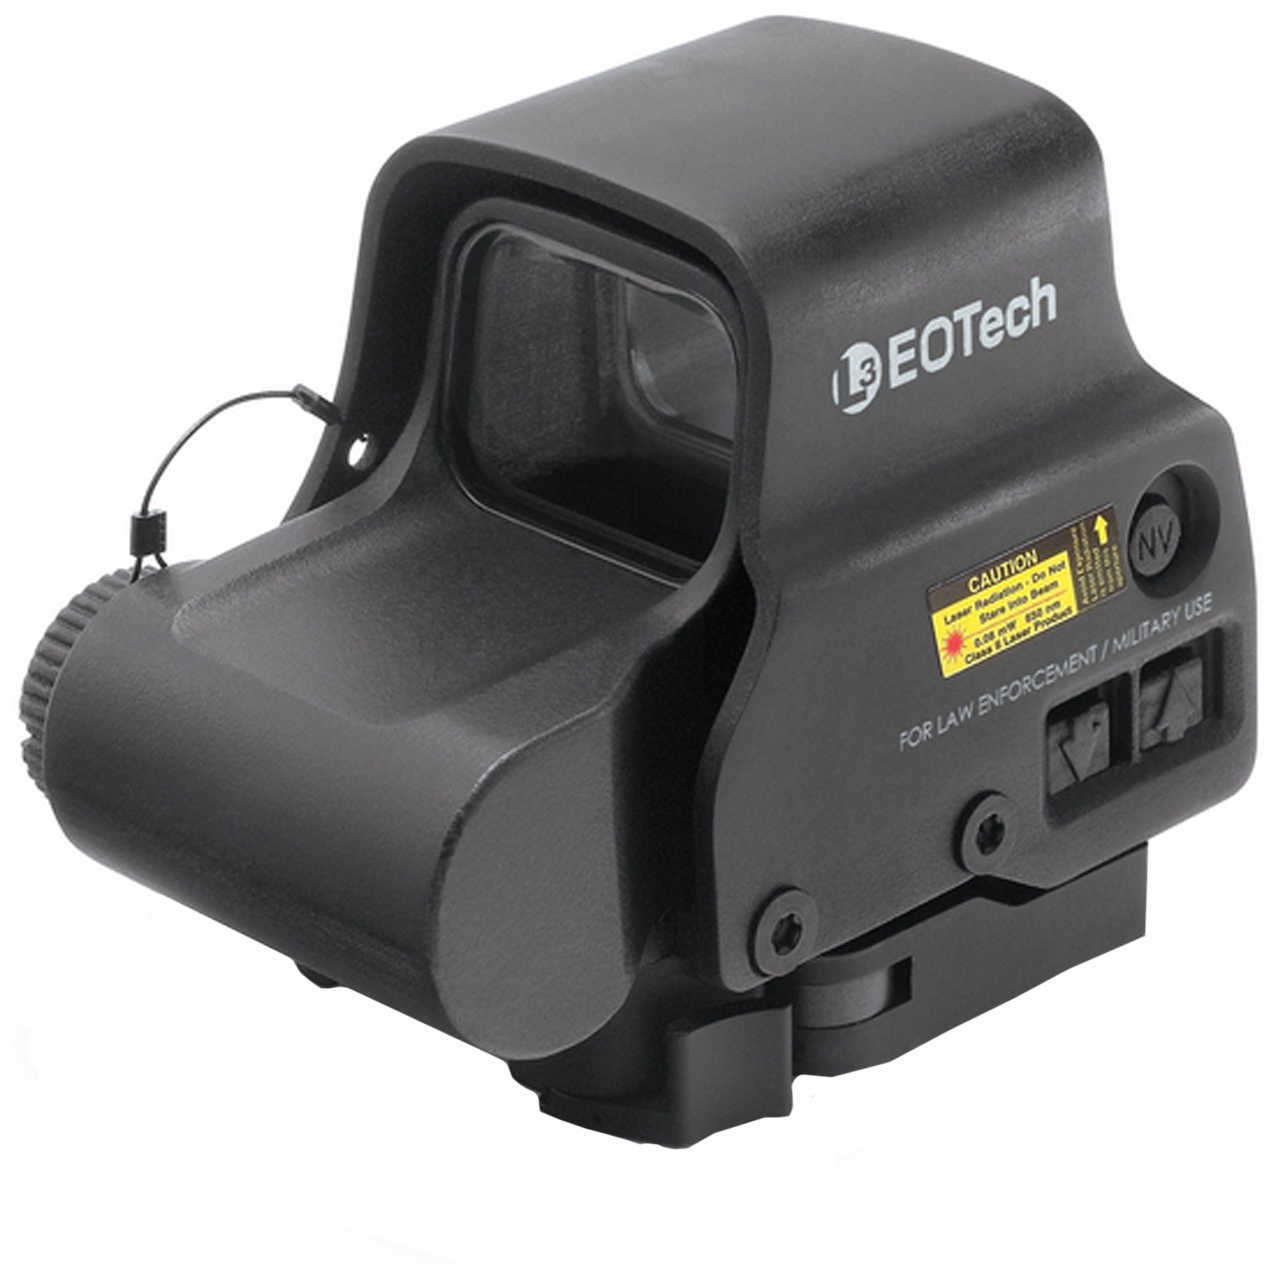 EOTech Side Button Night Vision Compatible Sight 65 MOA Ring And Two 1 MOA Dots Black Cr123 Lithium Battery Quick Discon